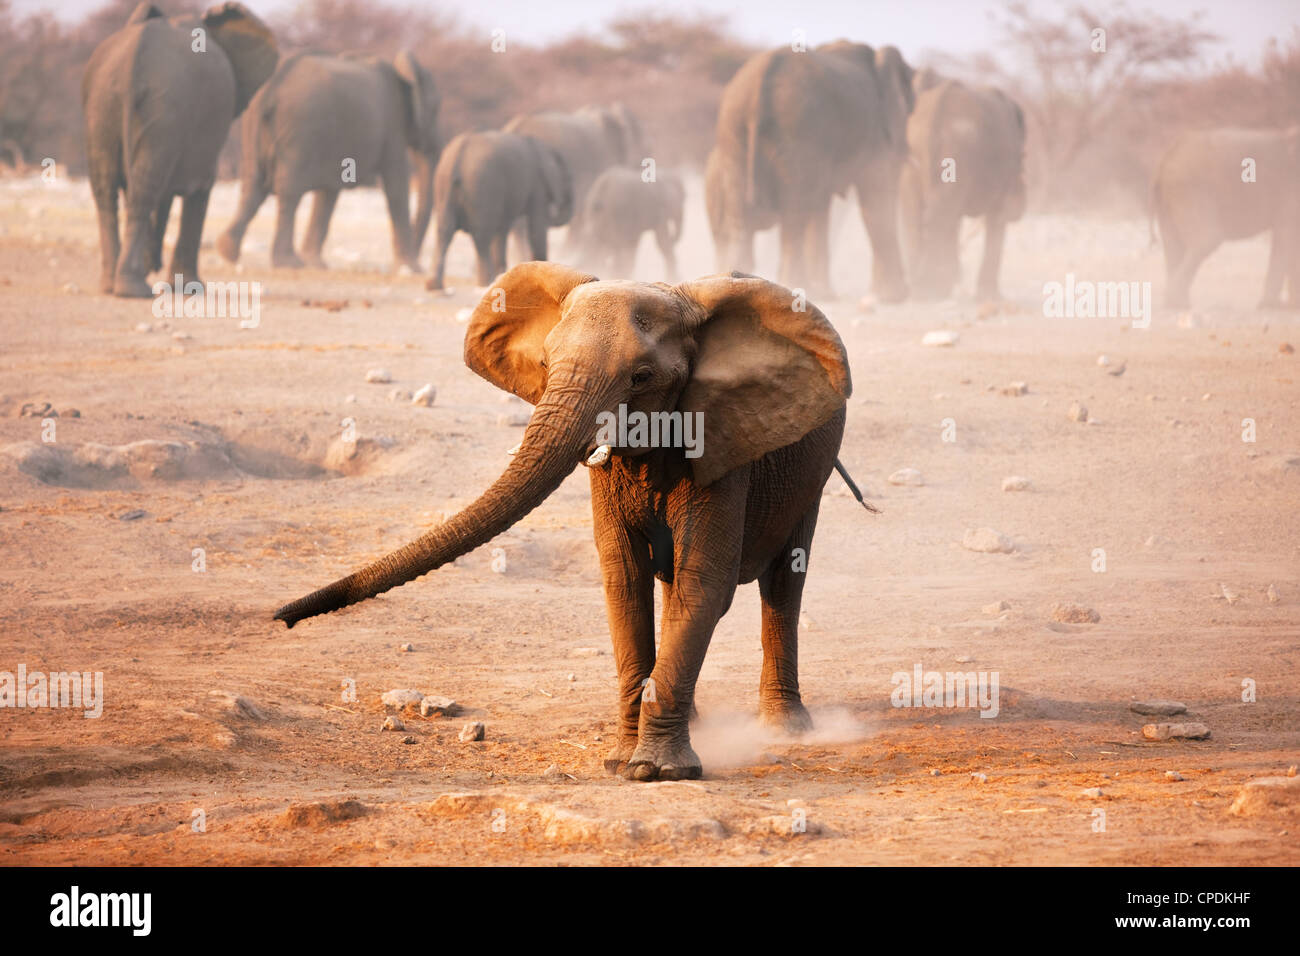 Young Elephant mock charging with herd walking away in background Stock Photo